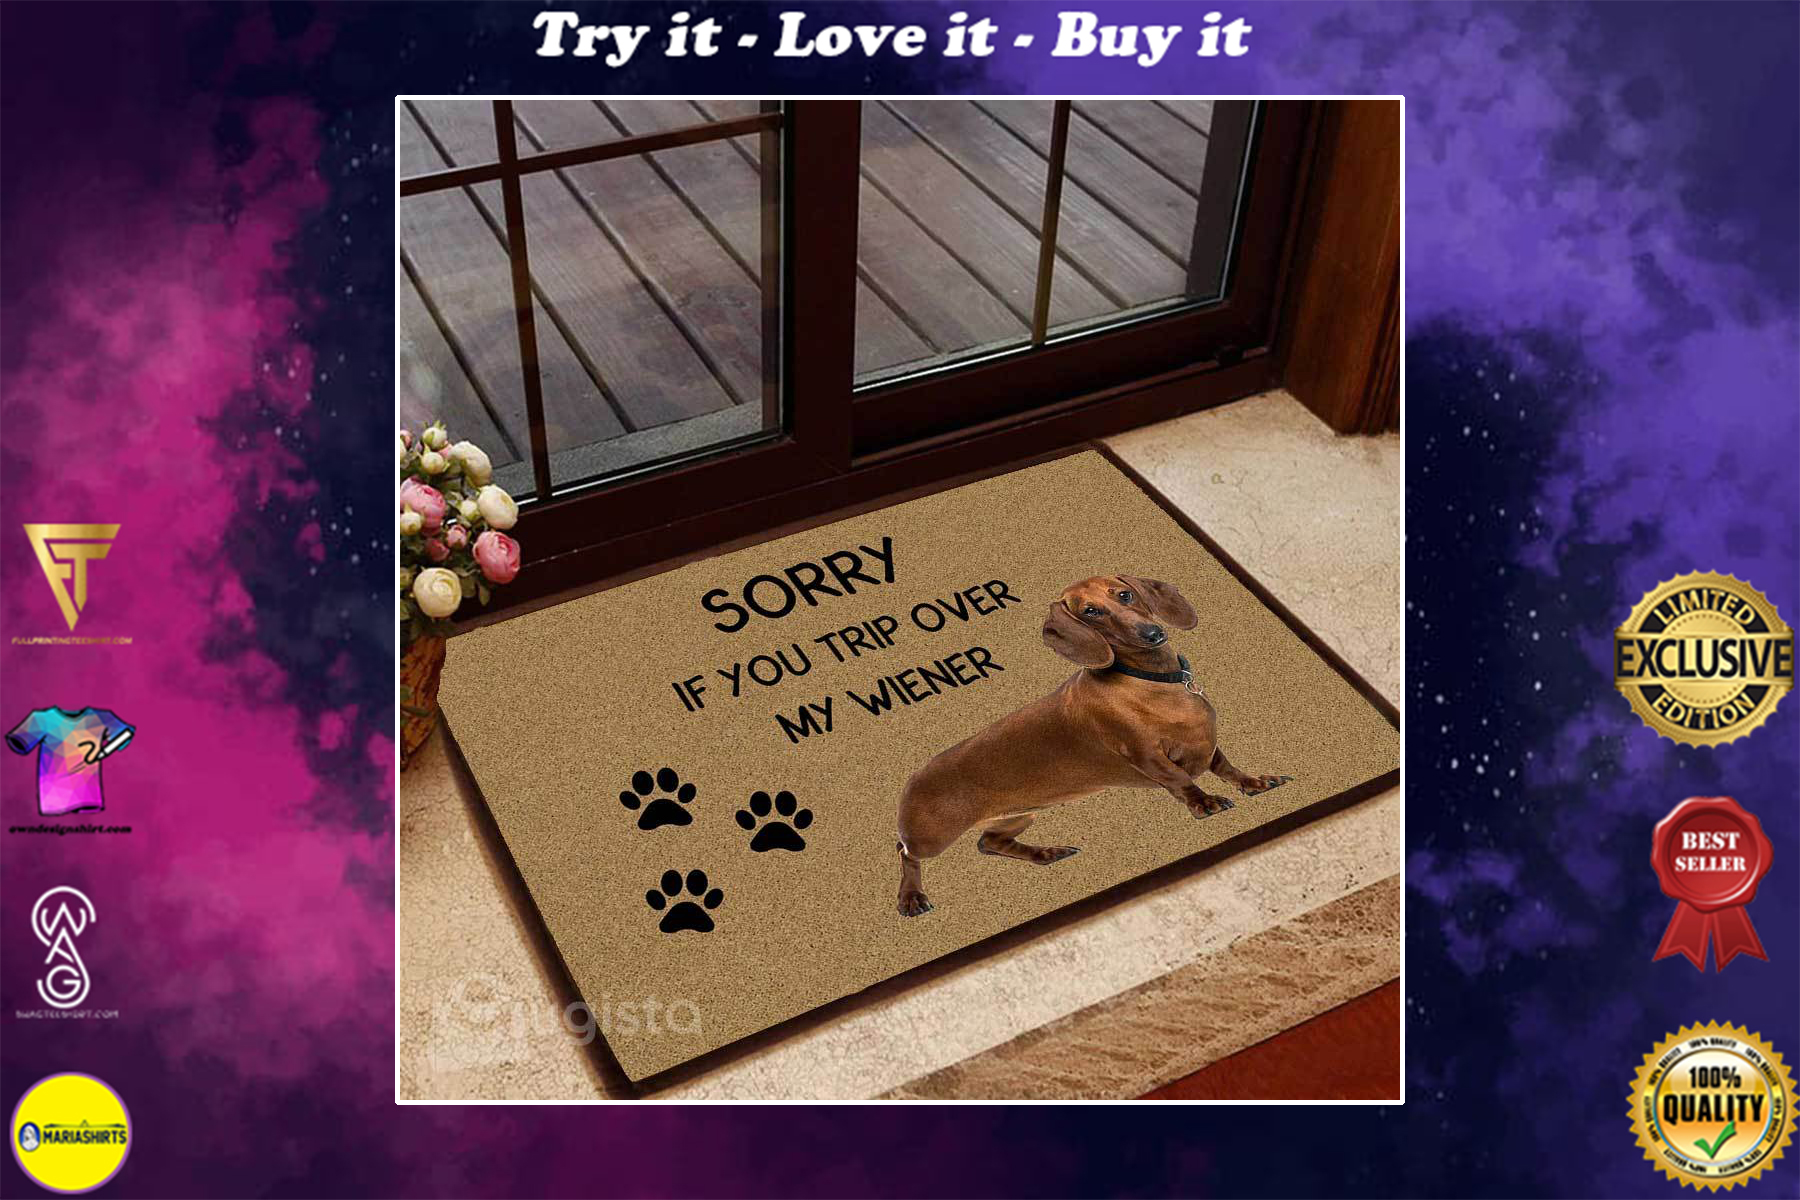 [special edition] sorry if you trip over my wiener dachshund doormat – maria